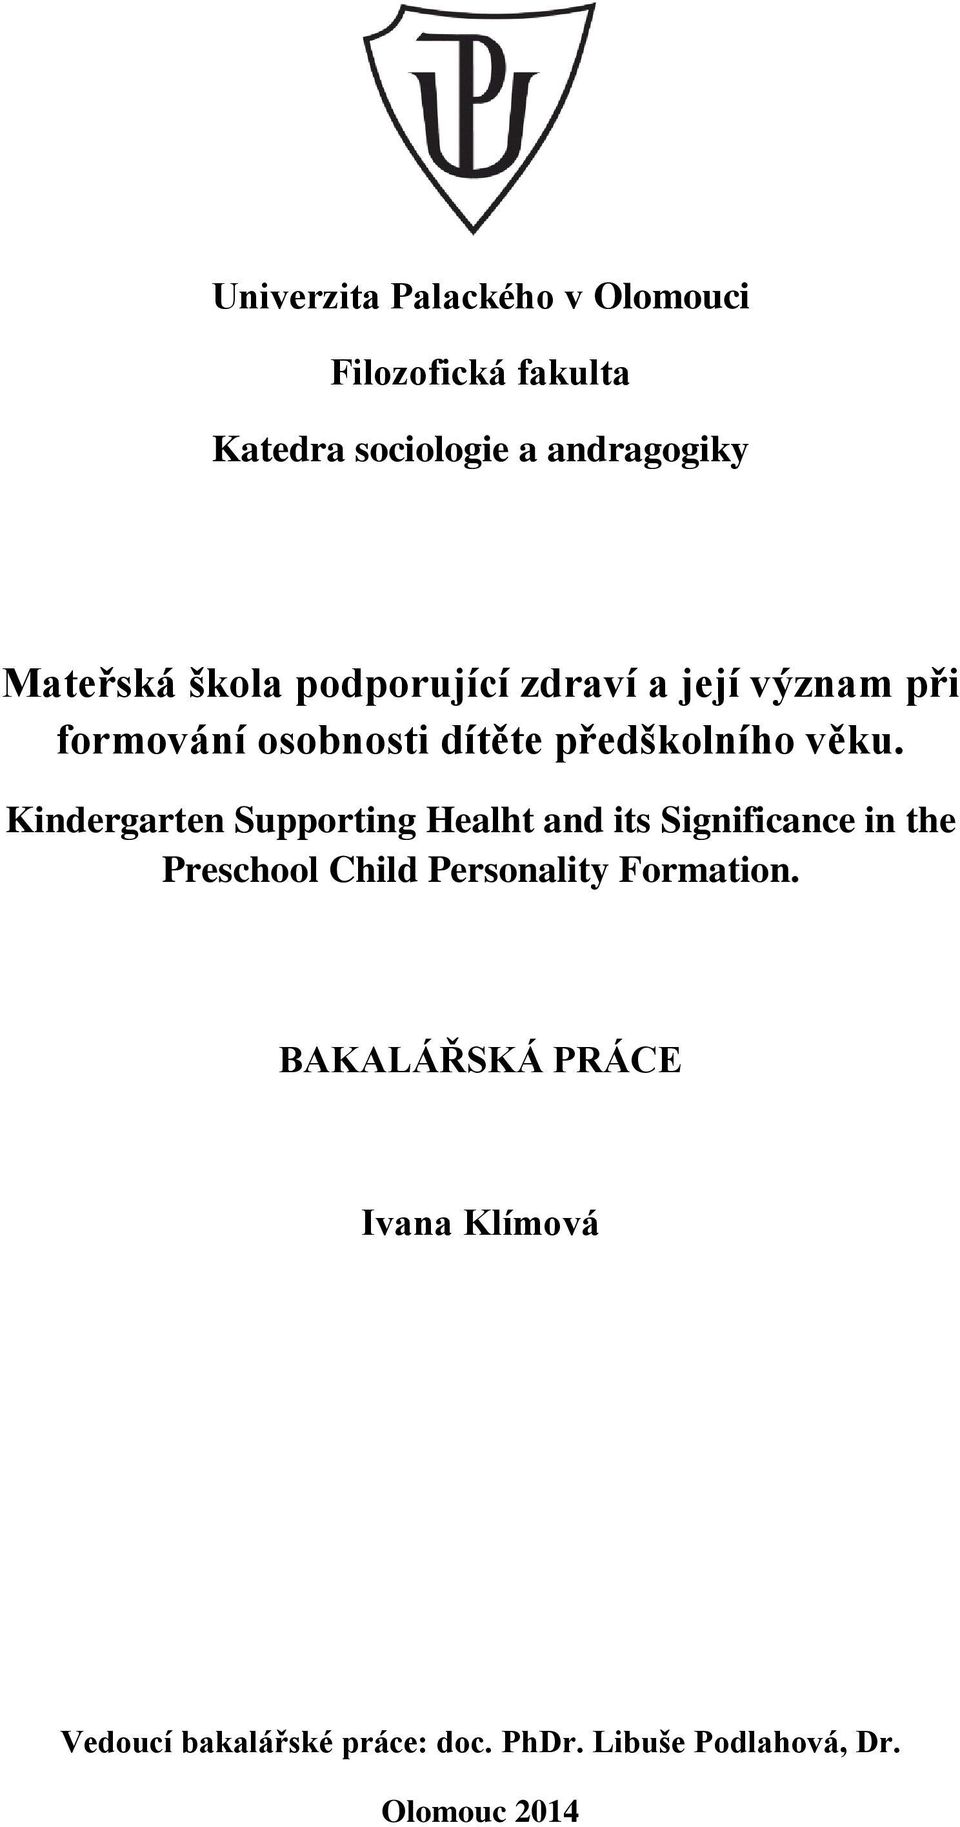 Kindergarten Supporting Healht and its Significance in the Preschool Child Personality